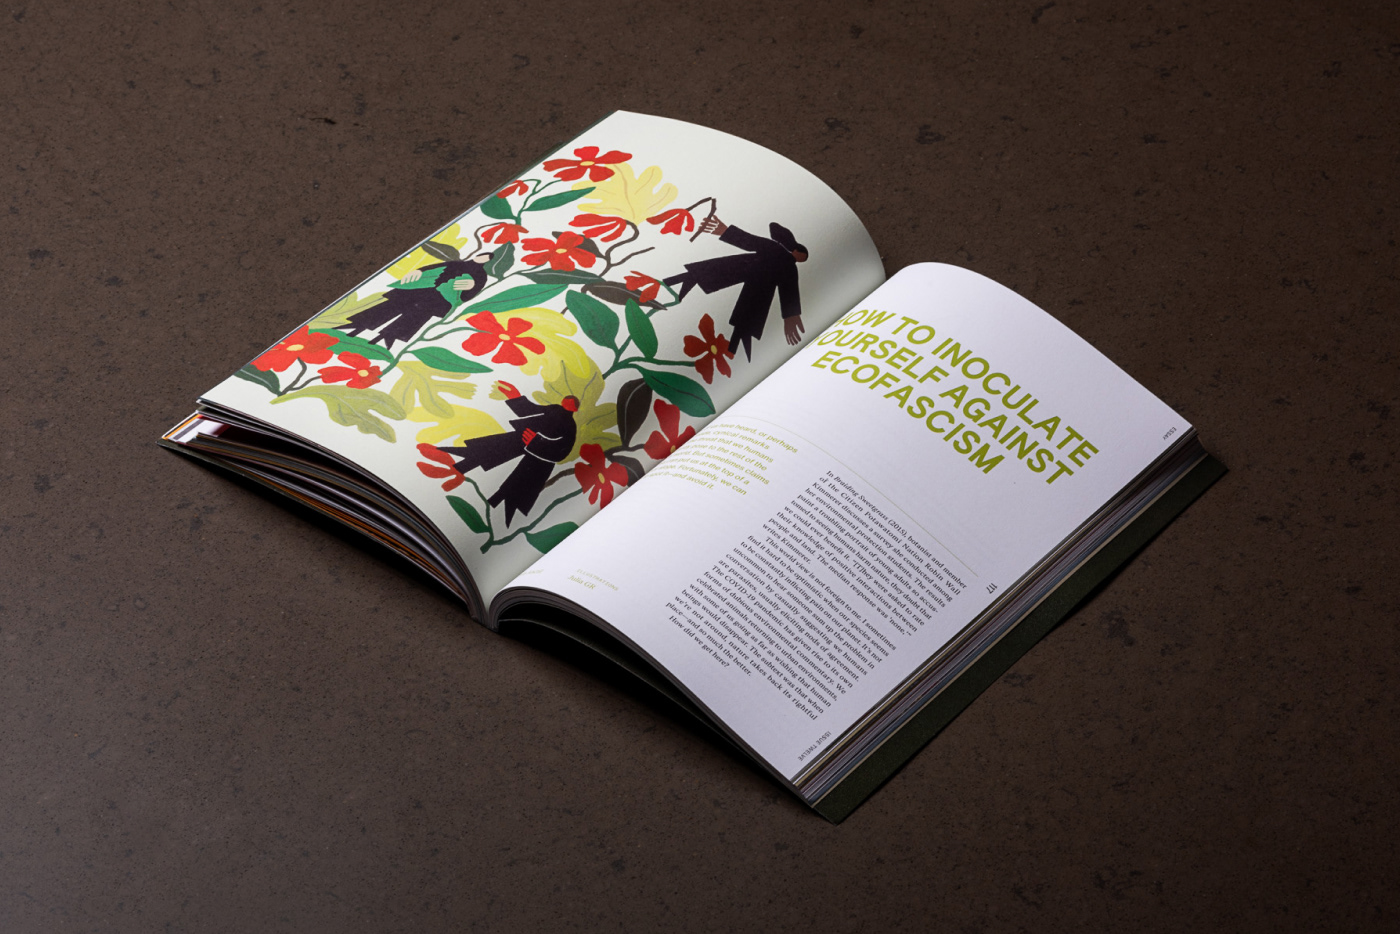 brand culture design editorial magazine Nature power sustainaibility typography   visual identity